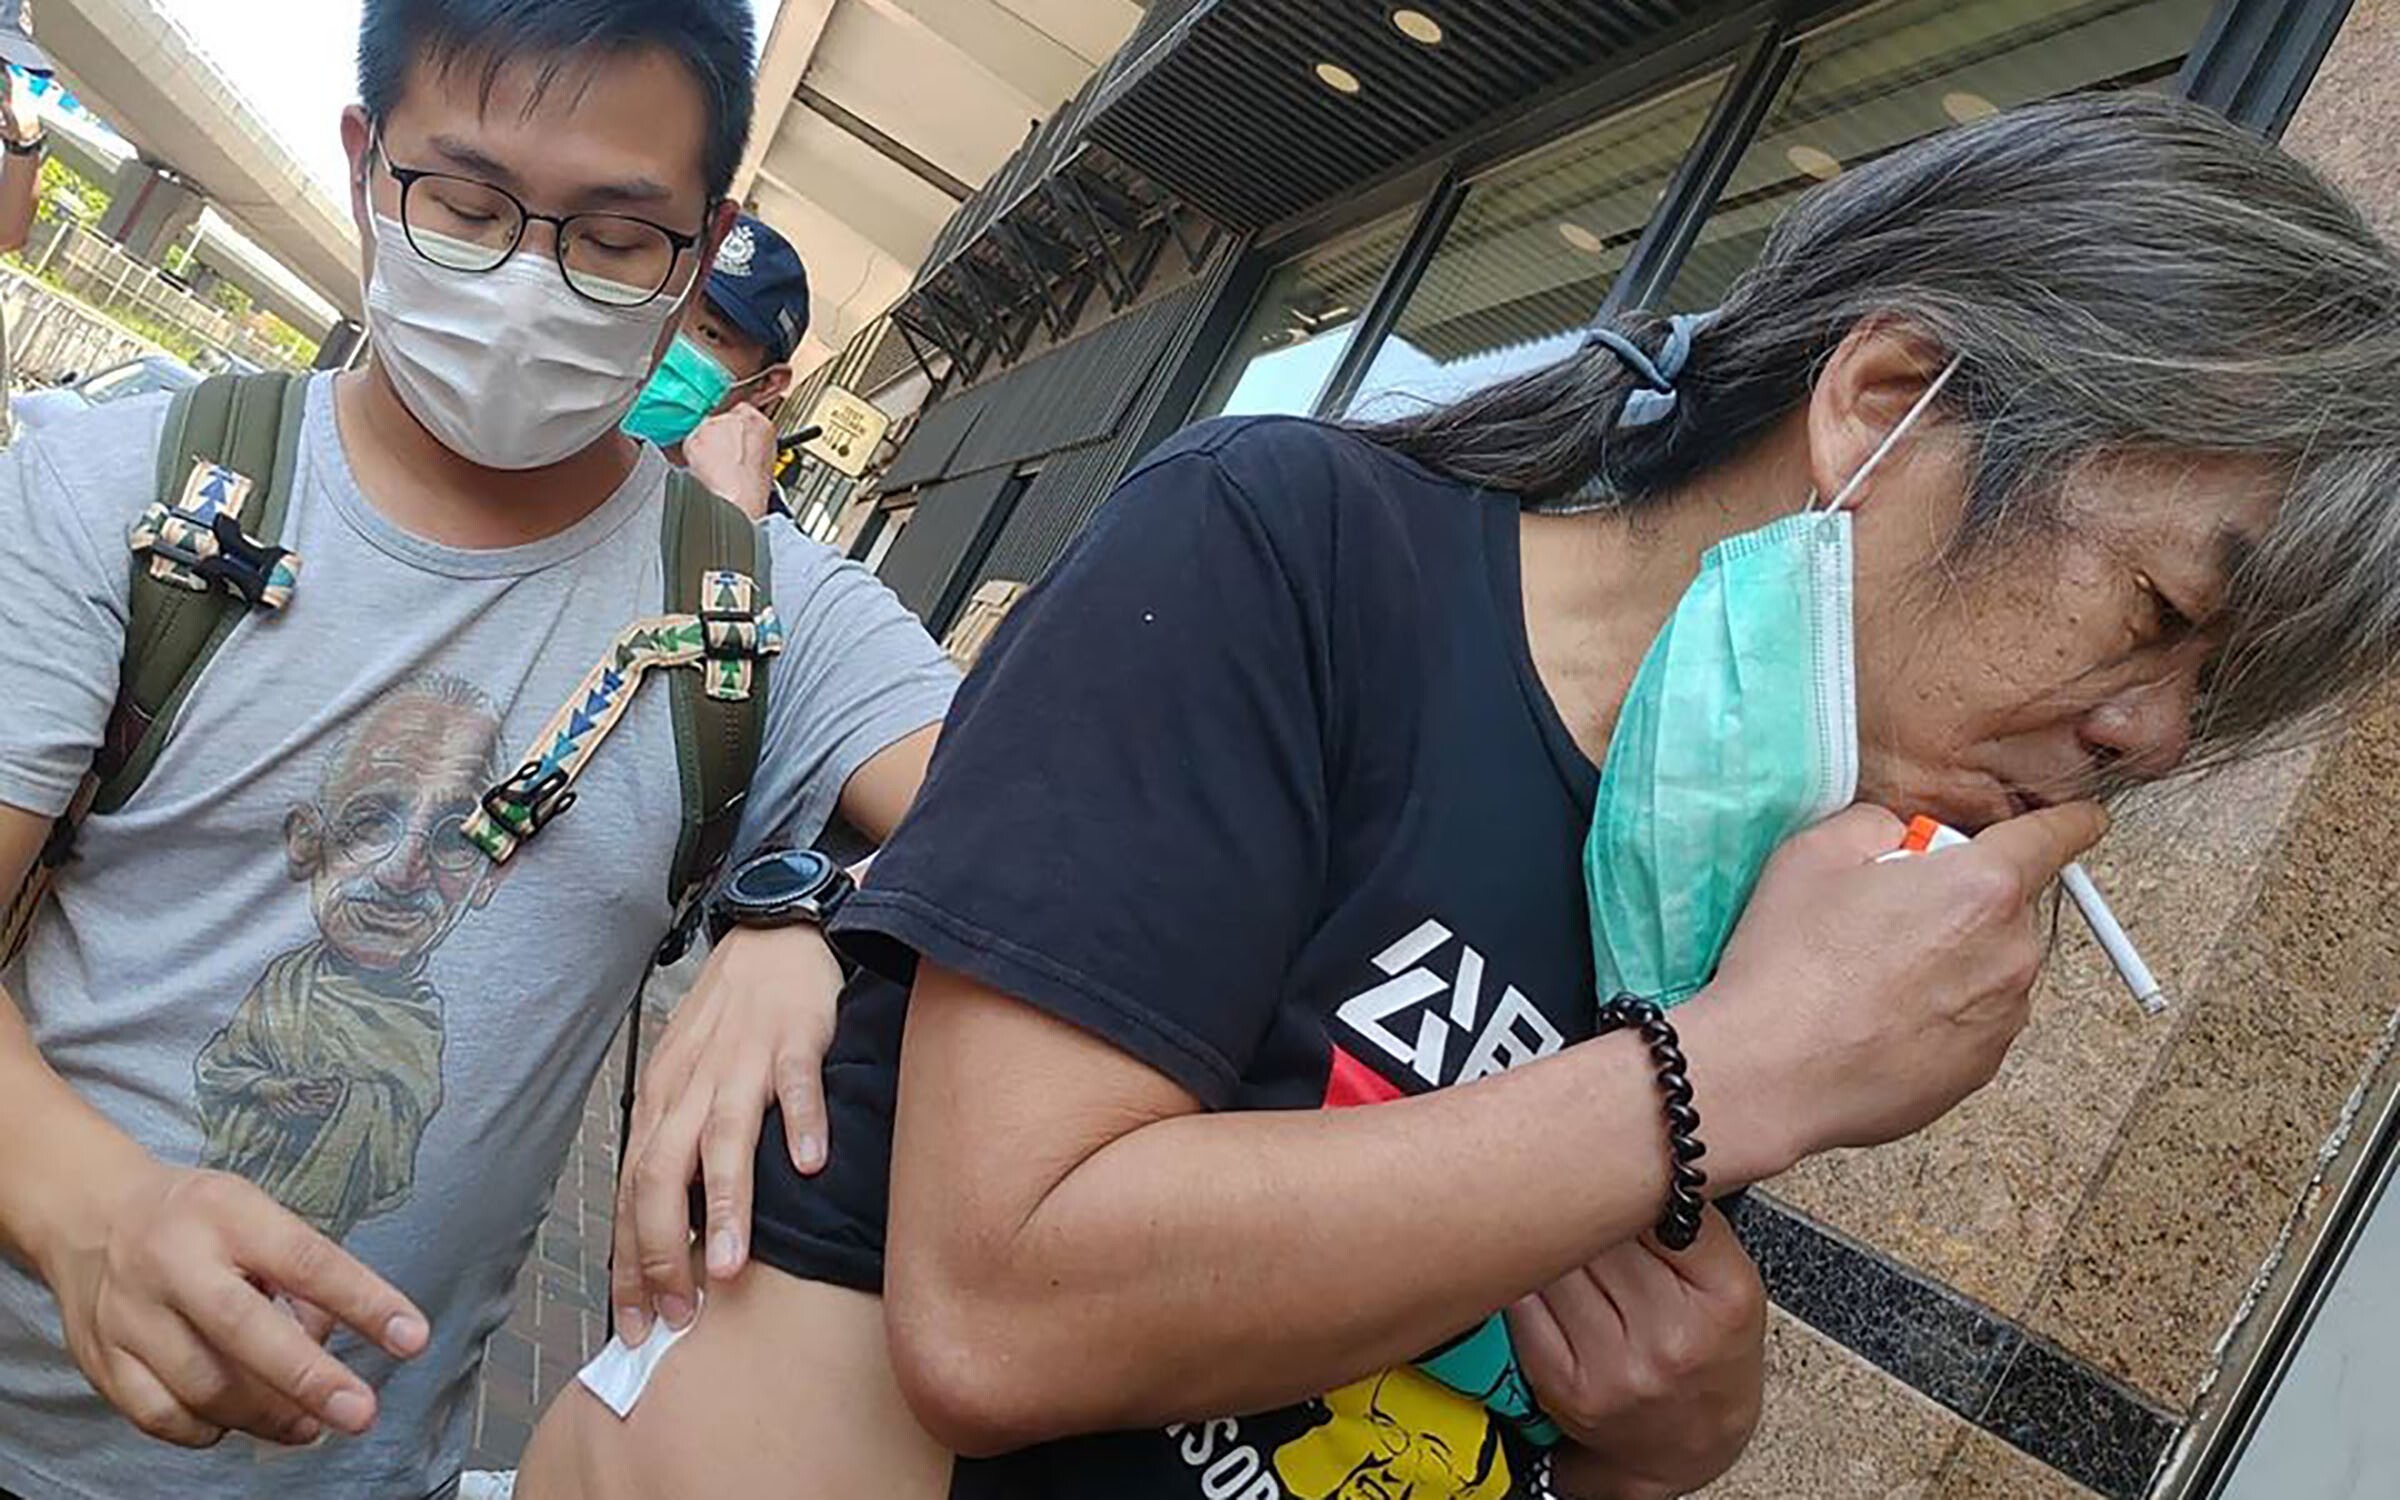 Activist and disqualified lawmaker ‘Long Hair’ Leung Kwok-hung was stabbed while protesting outside the central government’s liaison office in Hong Kong on Thursday but received only minor injuries. Photo: SCMP